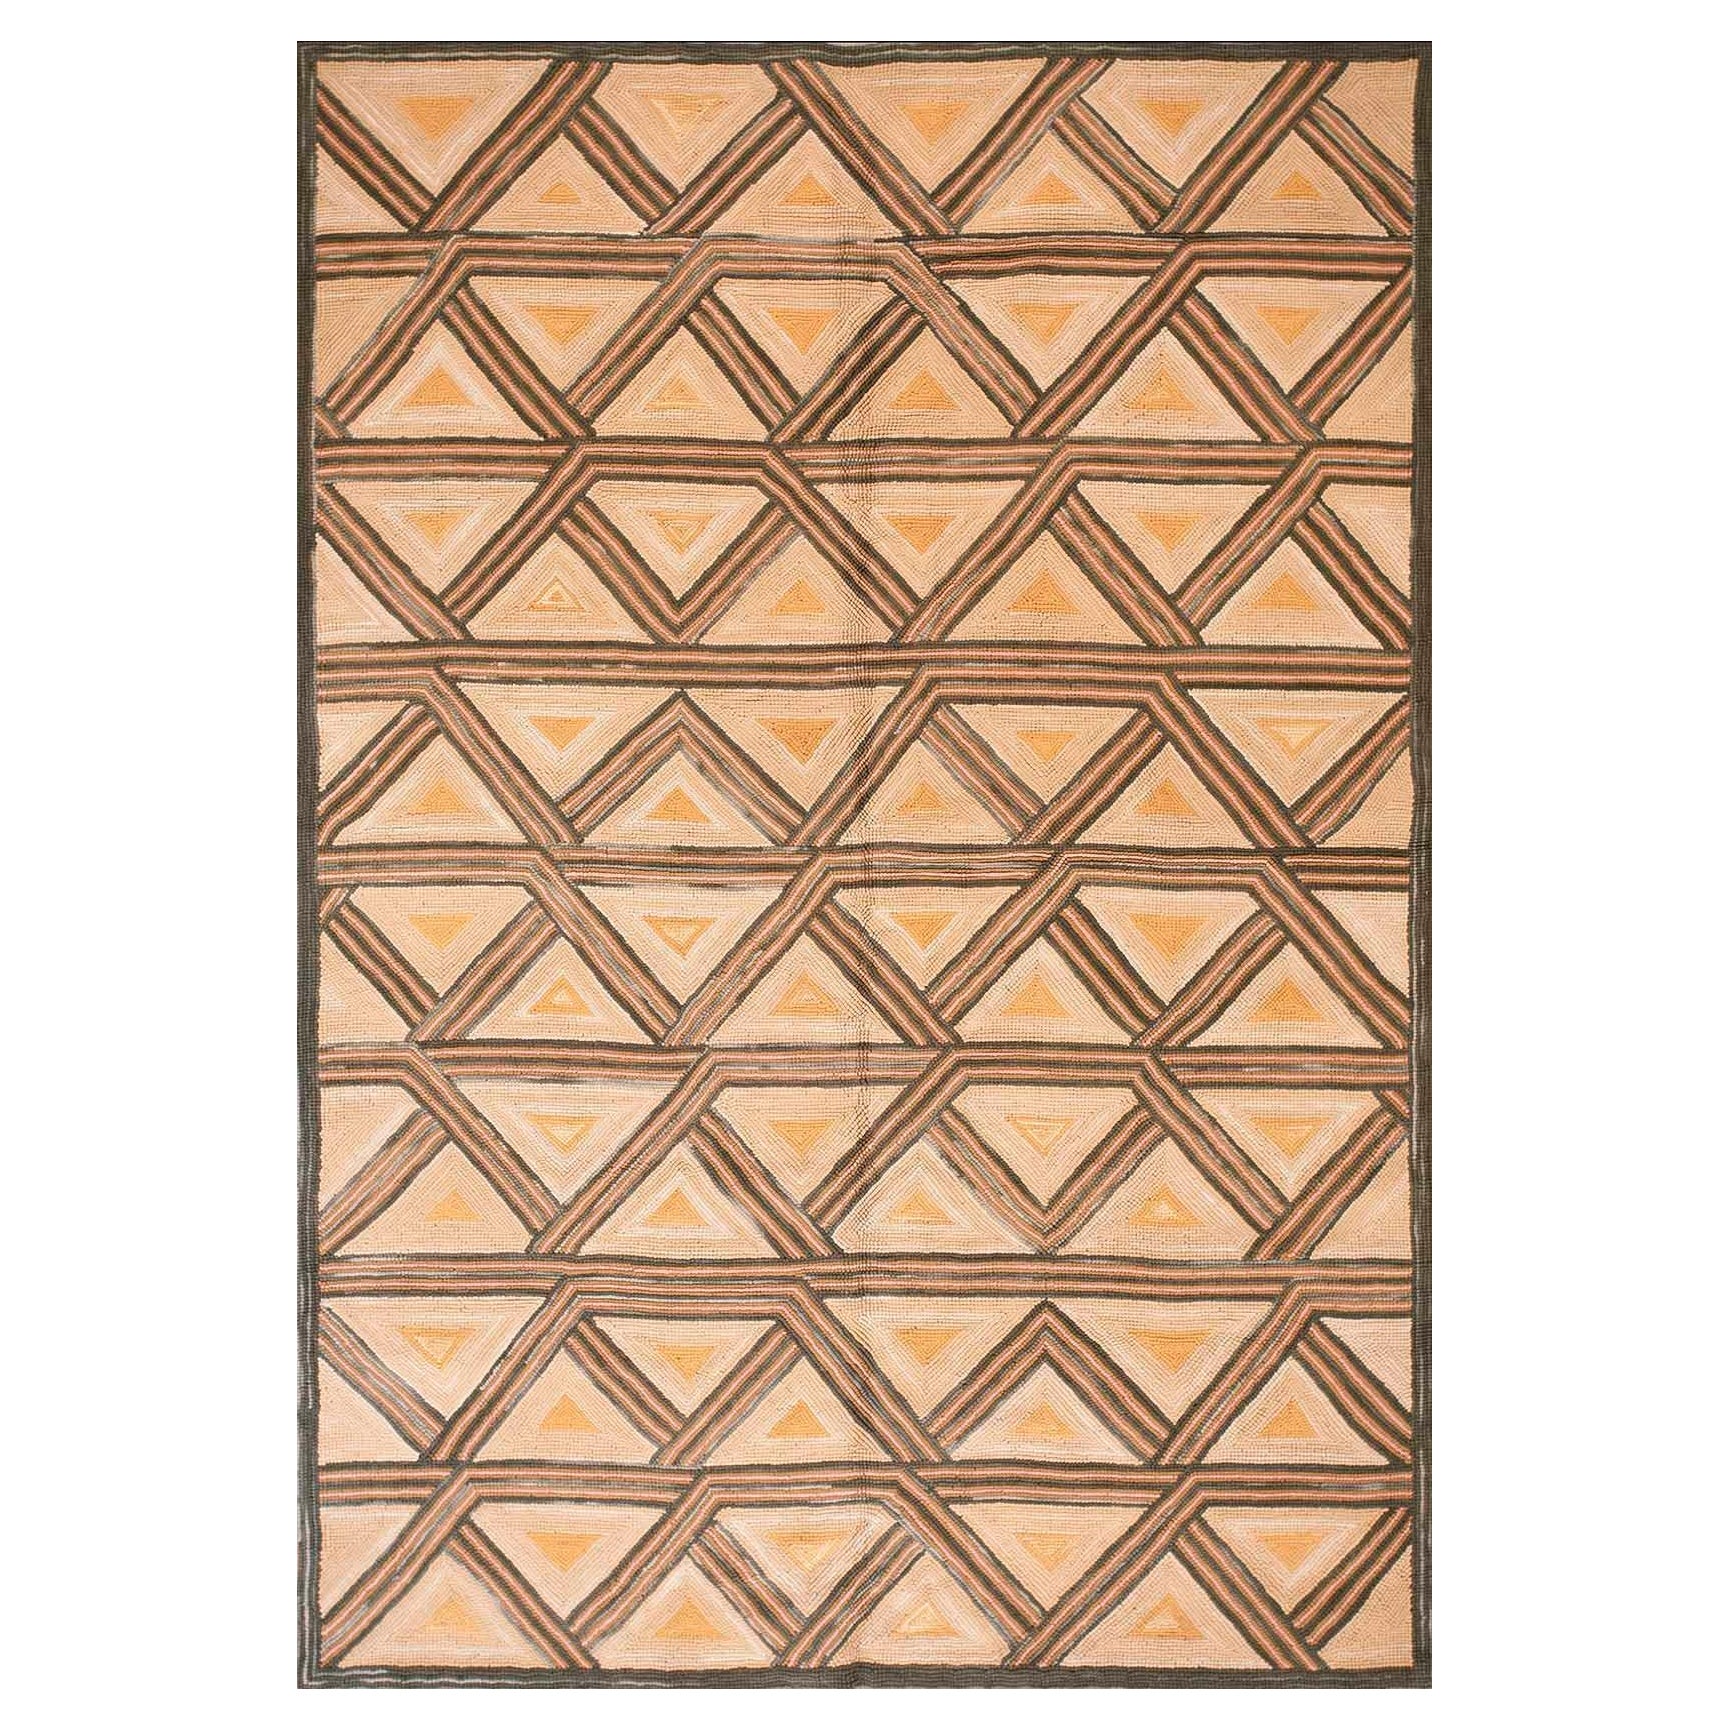 Contemporary Cotton Hooked Rug (6' x 9' - 183 x 274 )